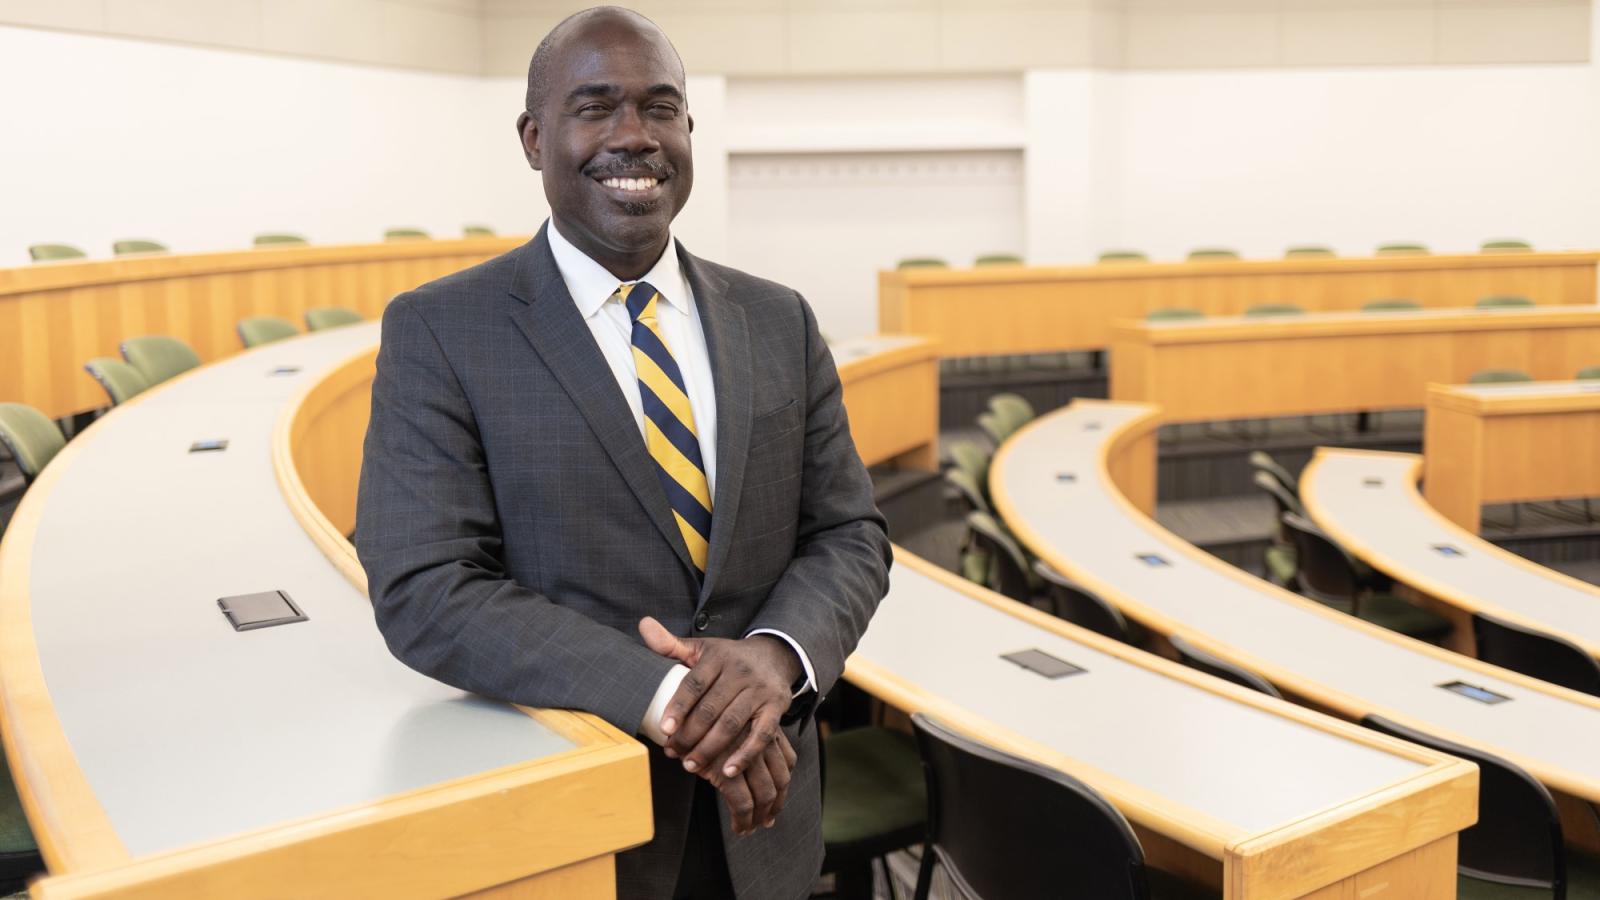 Elisabeth Haub School of Law at Pace University Dean Horace Anderson standing in a classroom